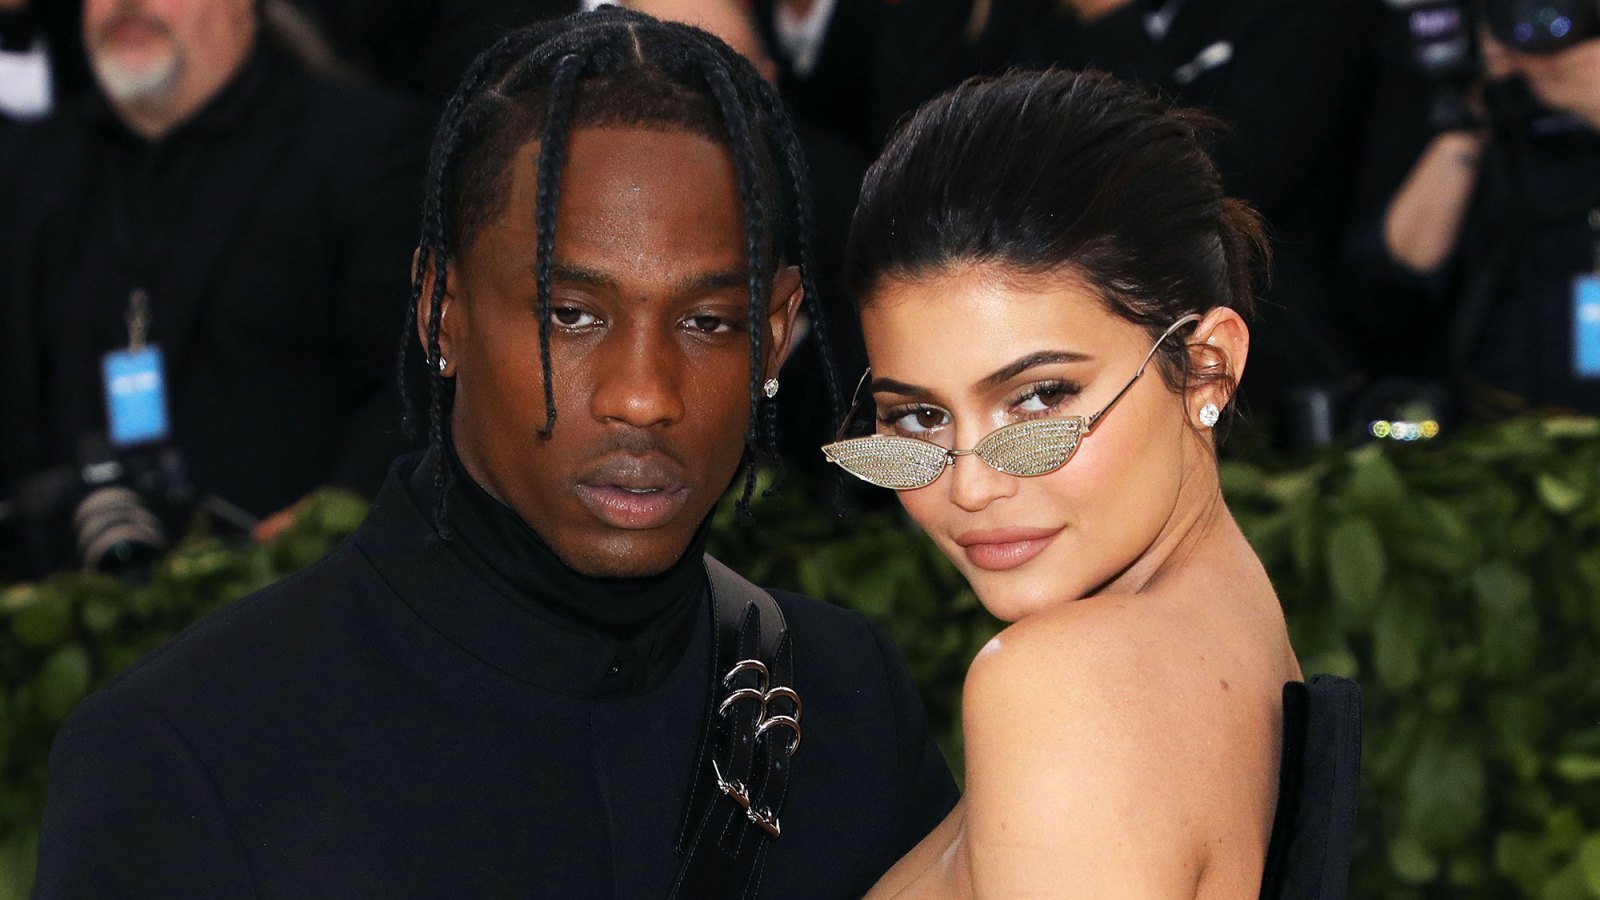 Kylie Jenner and Travis Scott ‘Want to Expand Their Family’ and Give Daughter Stormi a Sibling